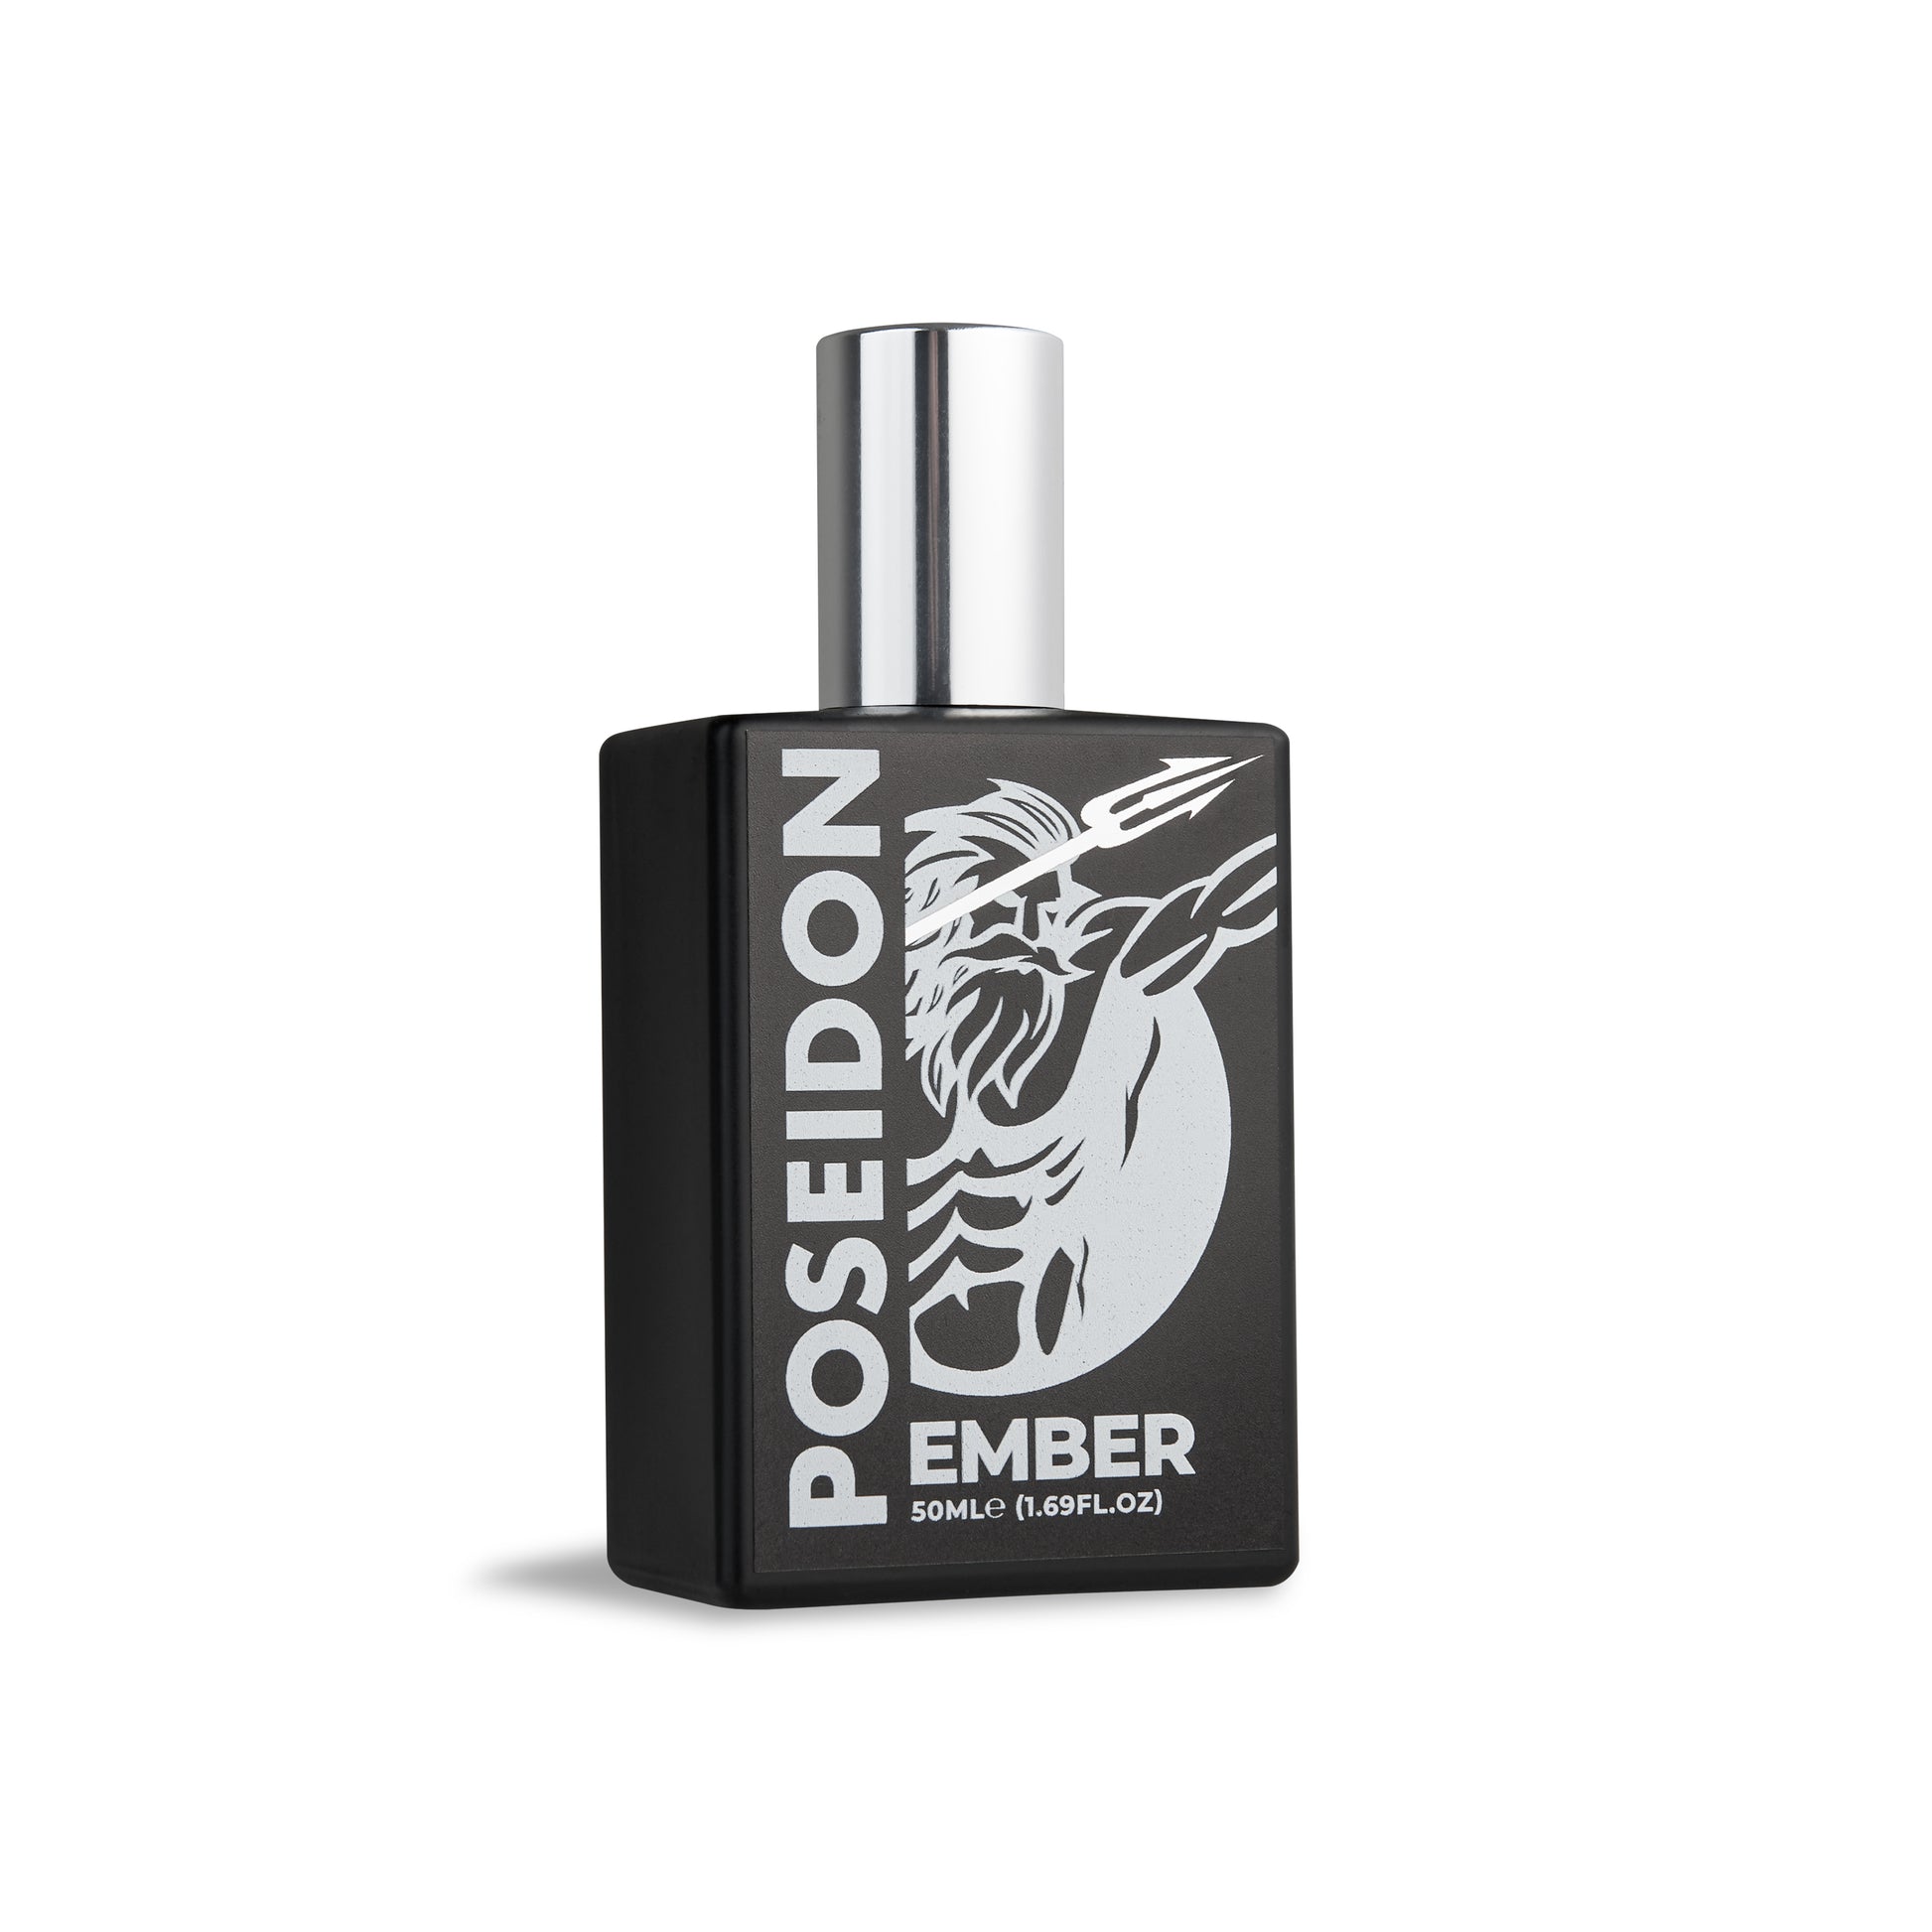 Poseidon Ember Cologne - Woody masculine scent inspired by Louis Vuitton Ombre Nomade. Rich, long-lasting fragrance for the modern gentleman.